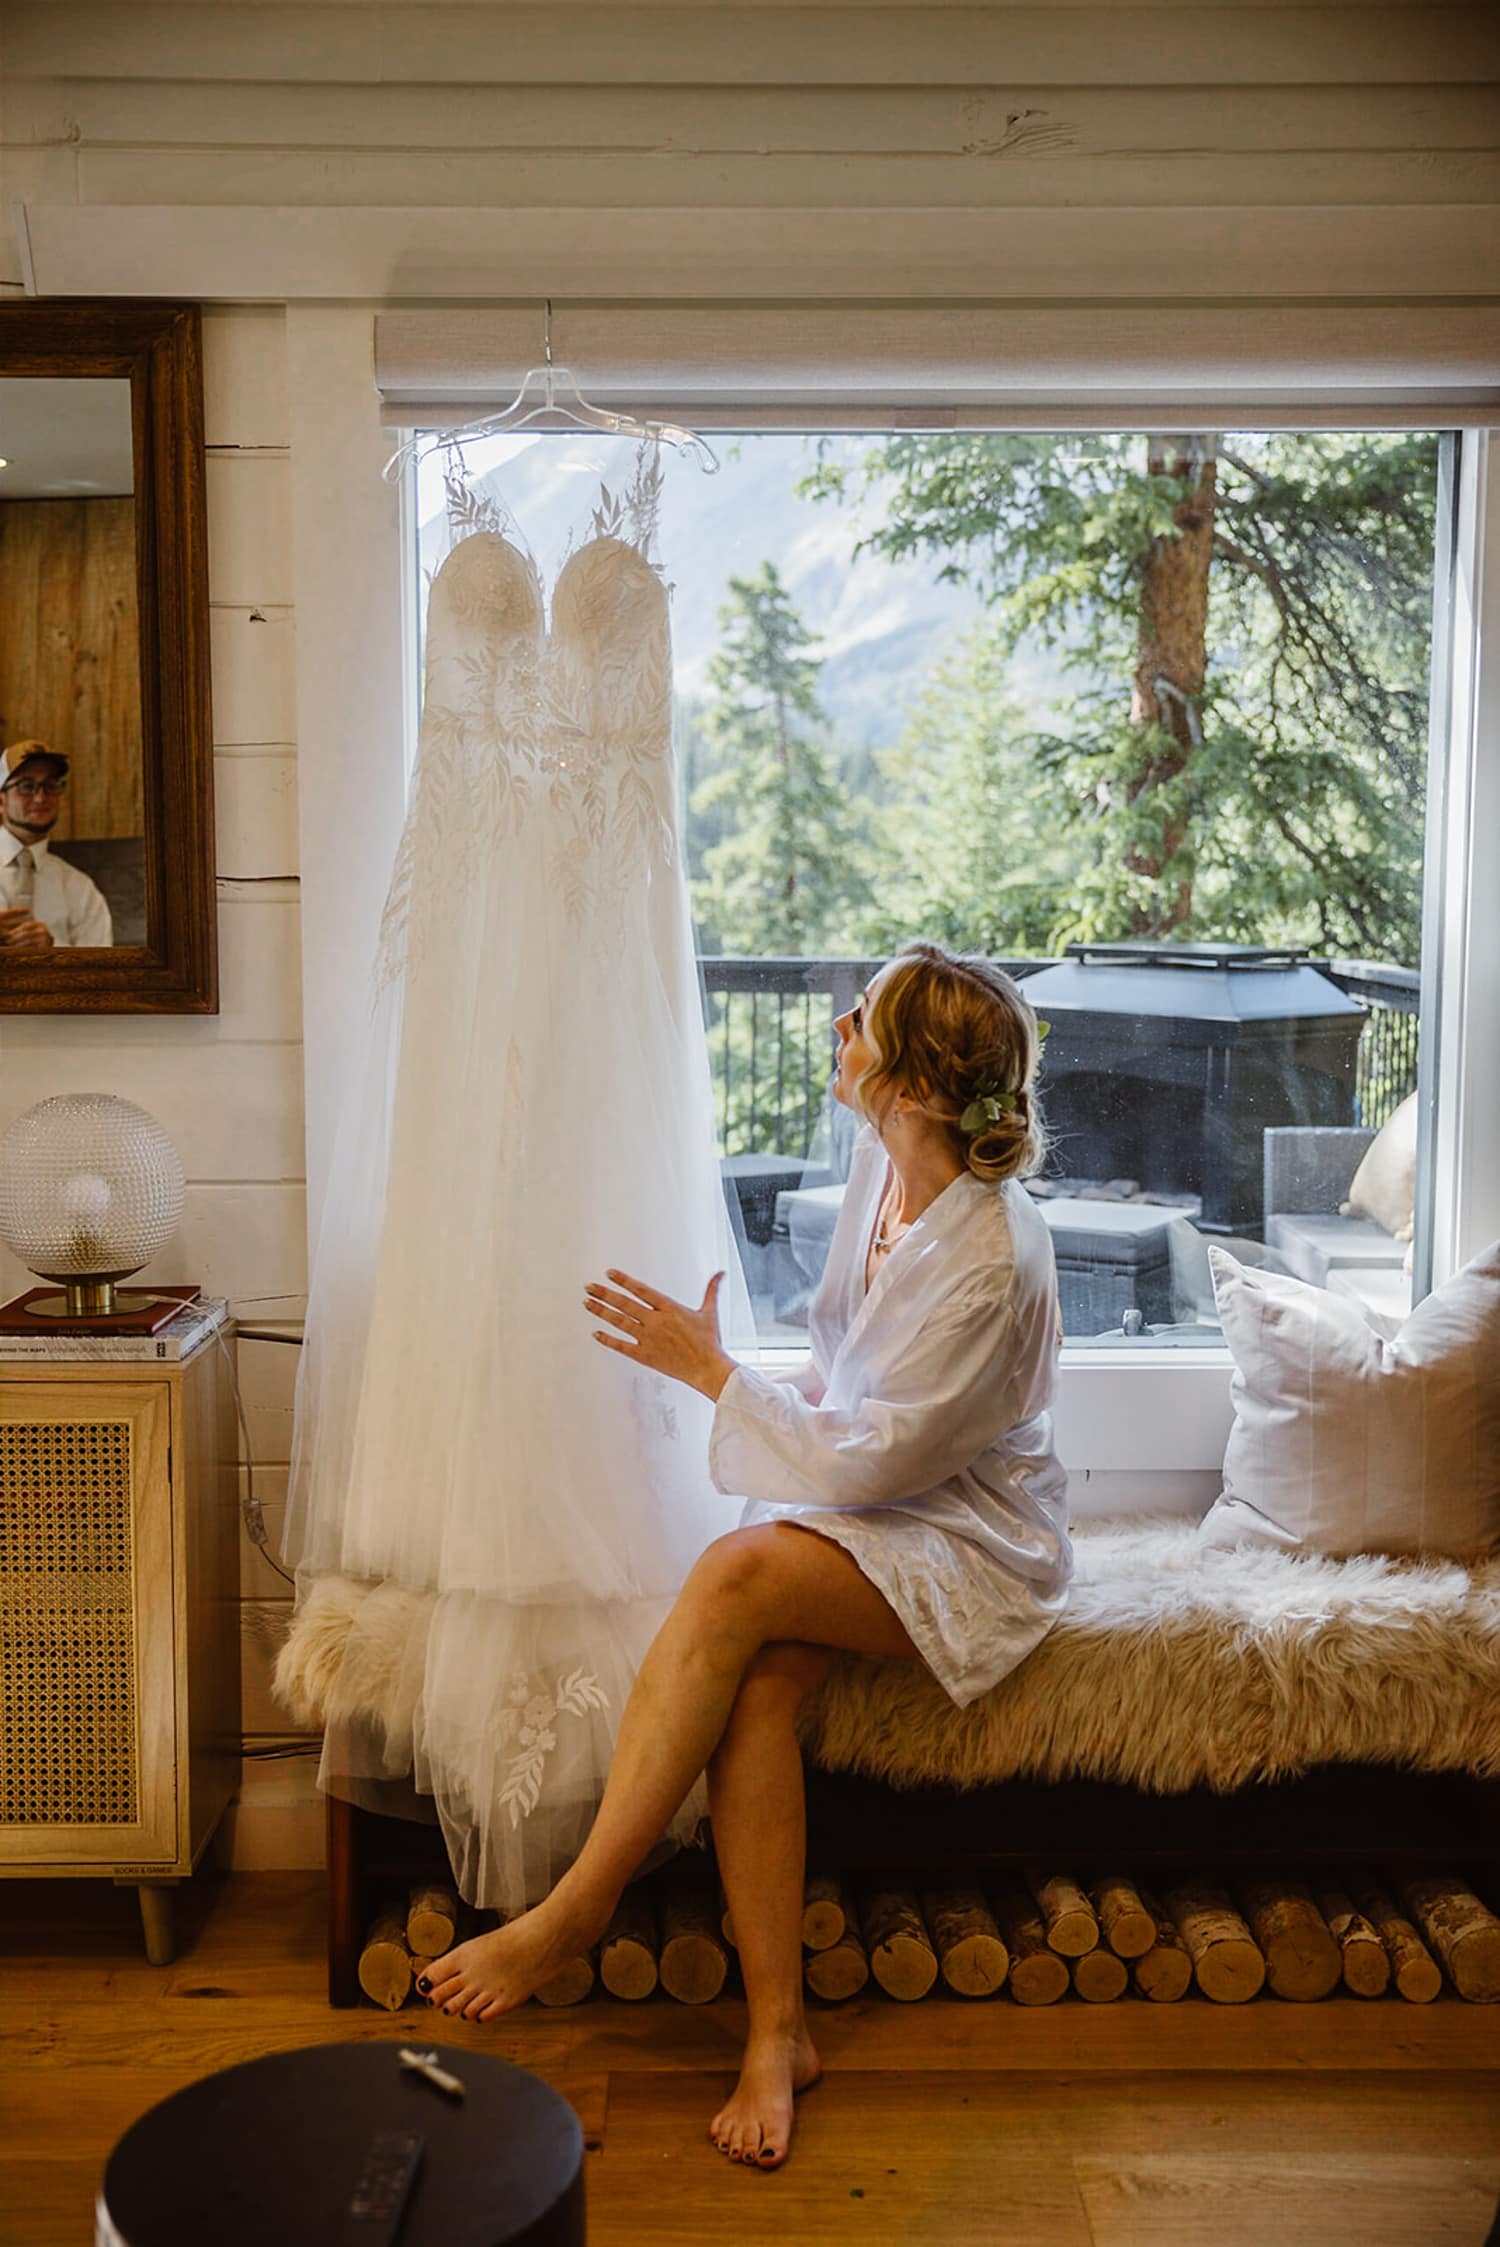 Bride getting ready at her airbnb elopement.